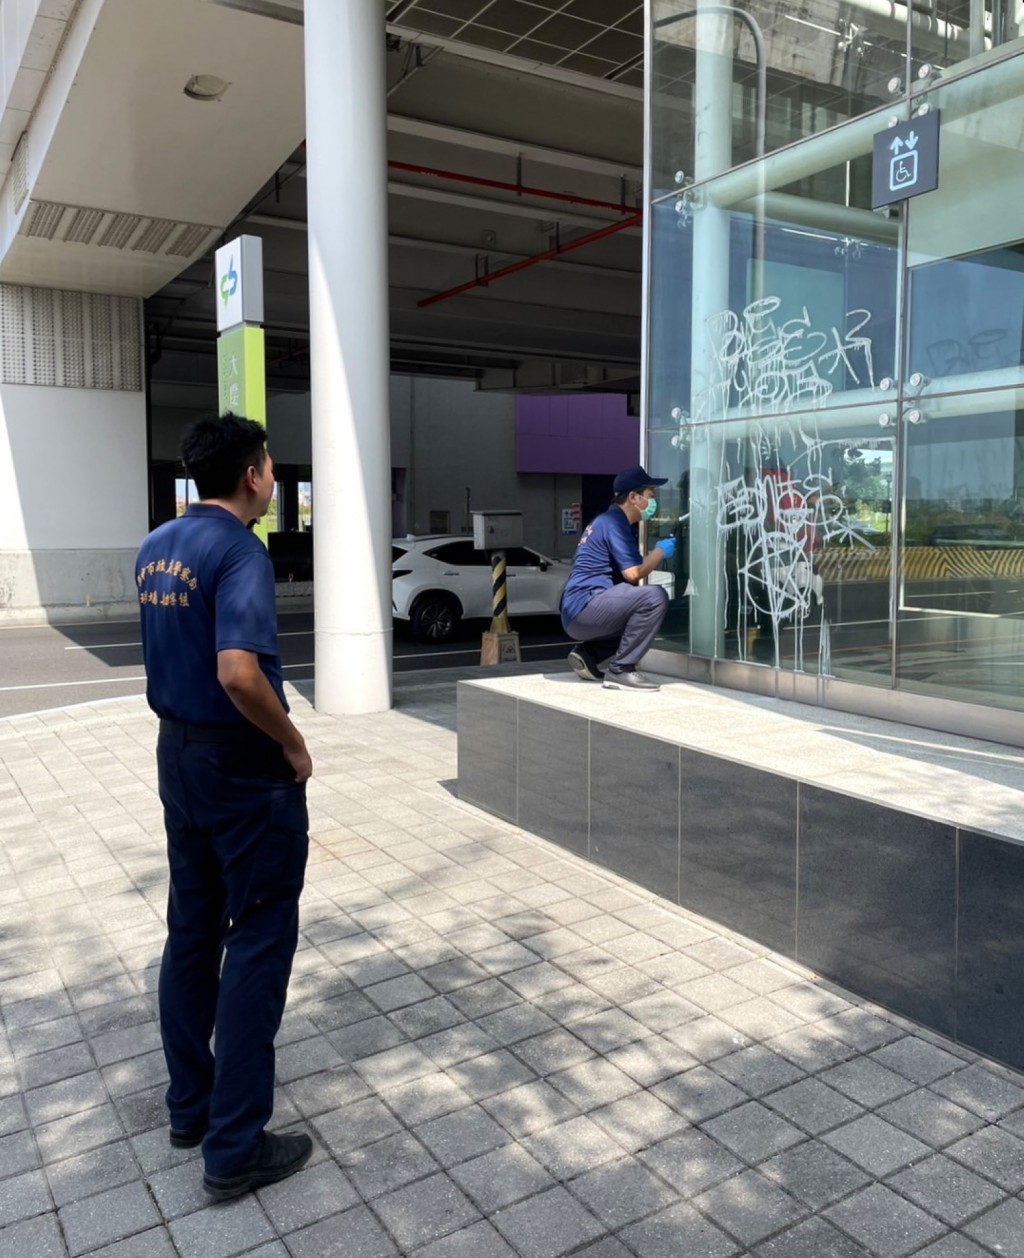 South African arrested for spraying graffiti on central Taiwan MRT station